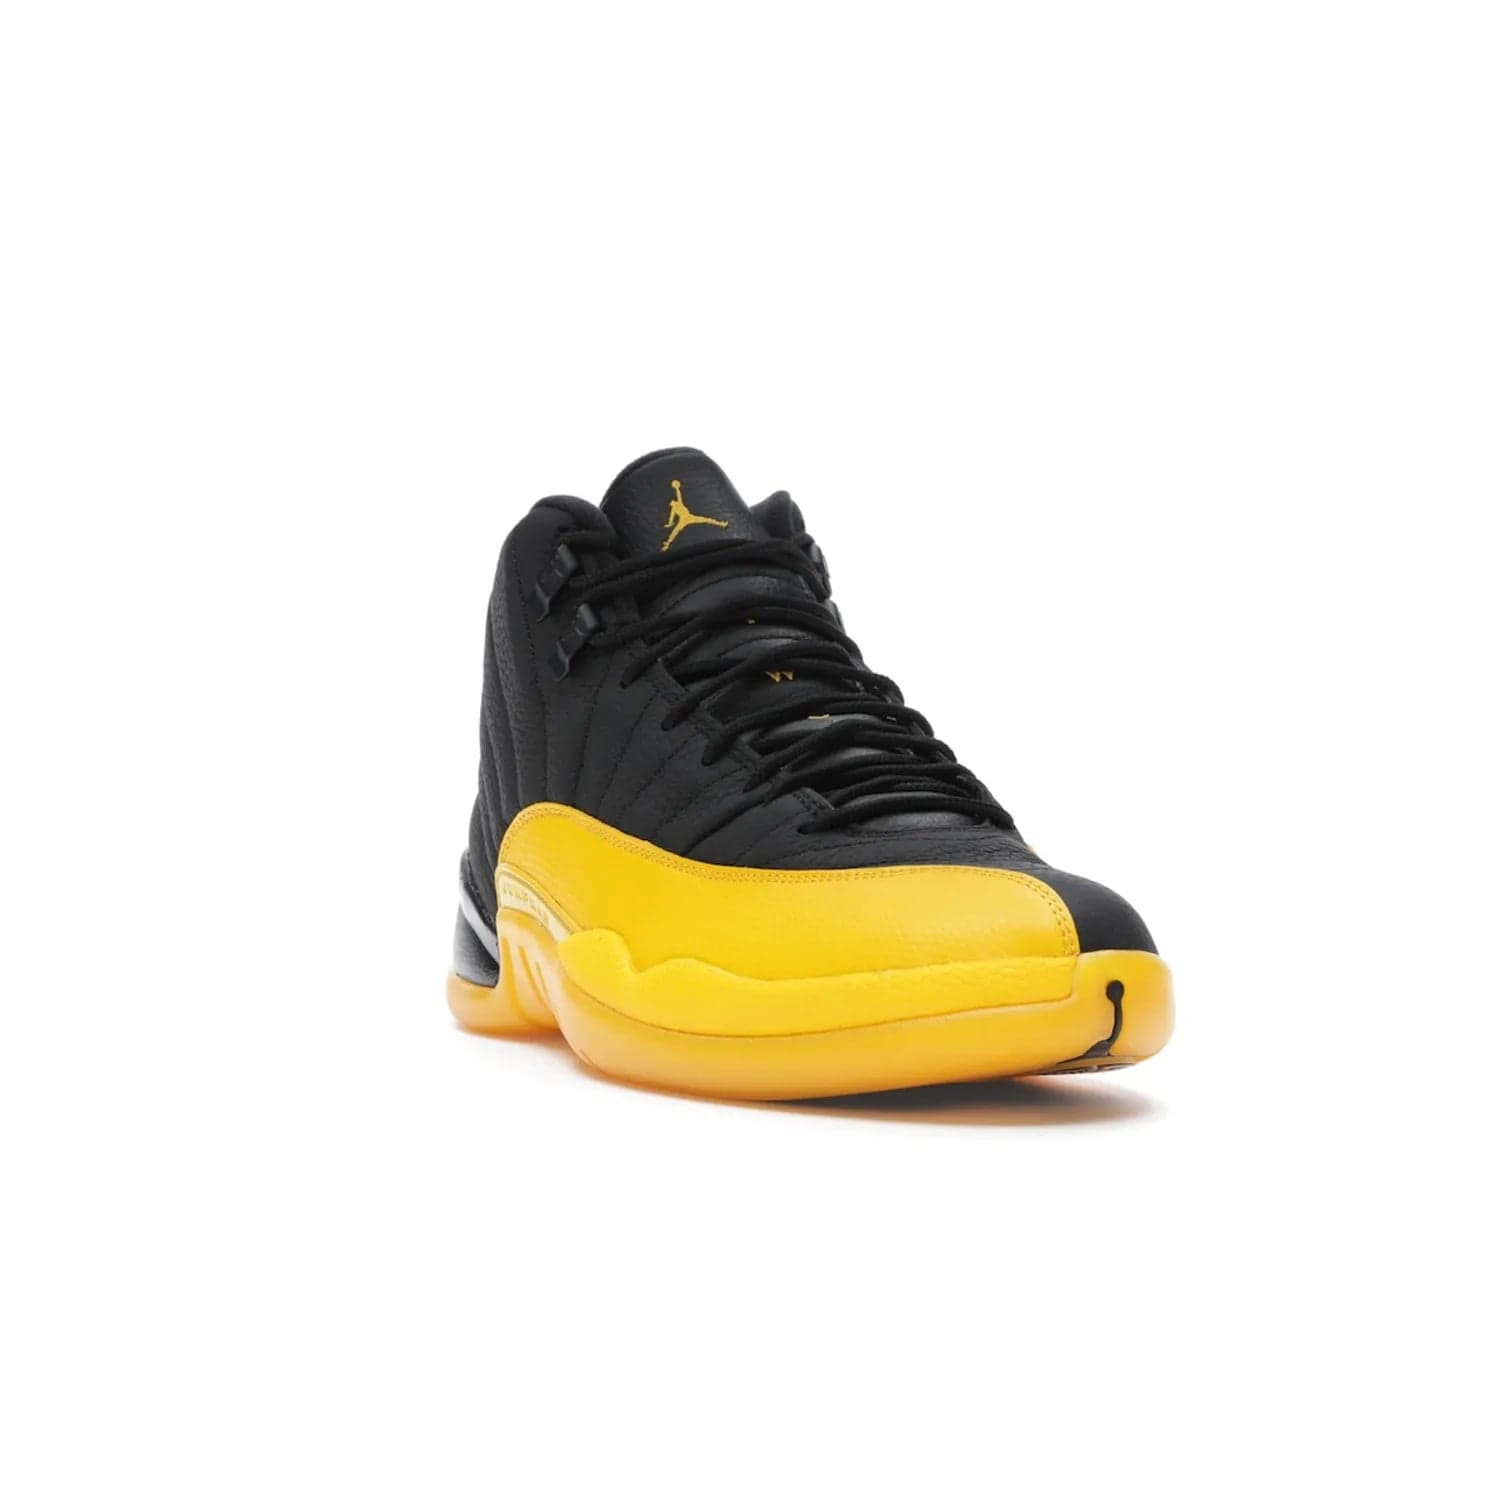 Jordan 12 Retro Black University Gold - Image 7 - Only at www.BallersClubKickz.com - This Jordan 12 Retro features a black tumbled leather upper and University Gold accents for a modern twist. Boasting Jordan "Two Three" branding and a yellow sole, these shoes will elevate your wardrobe. Fresh, sleek, and one of a kind - the Jordan 12 University Gold is your summer sneaker.